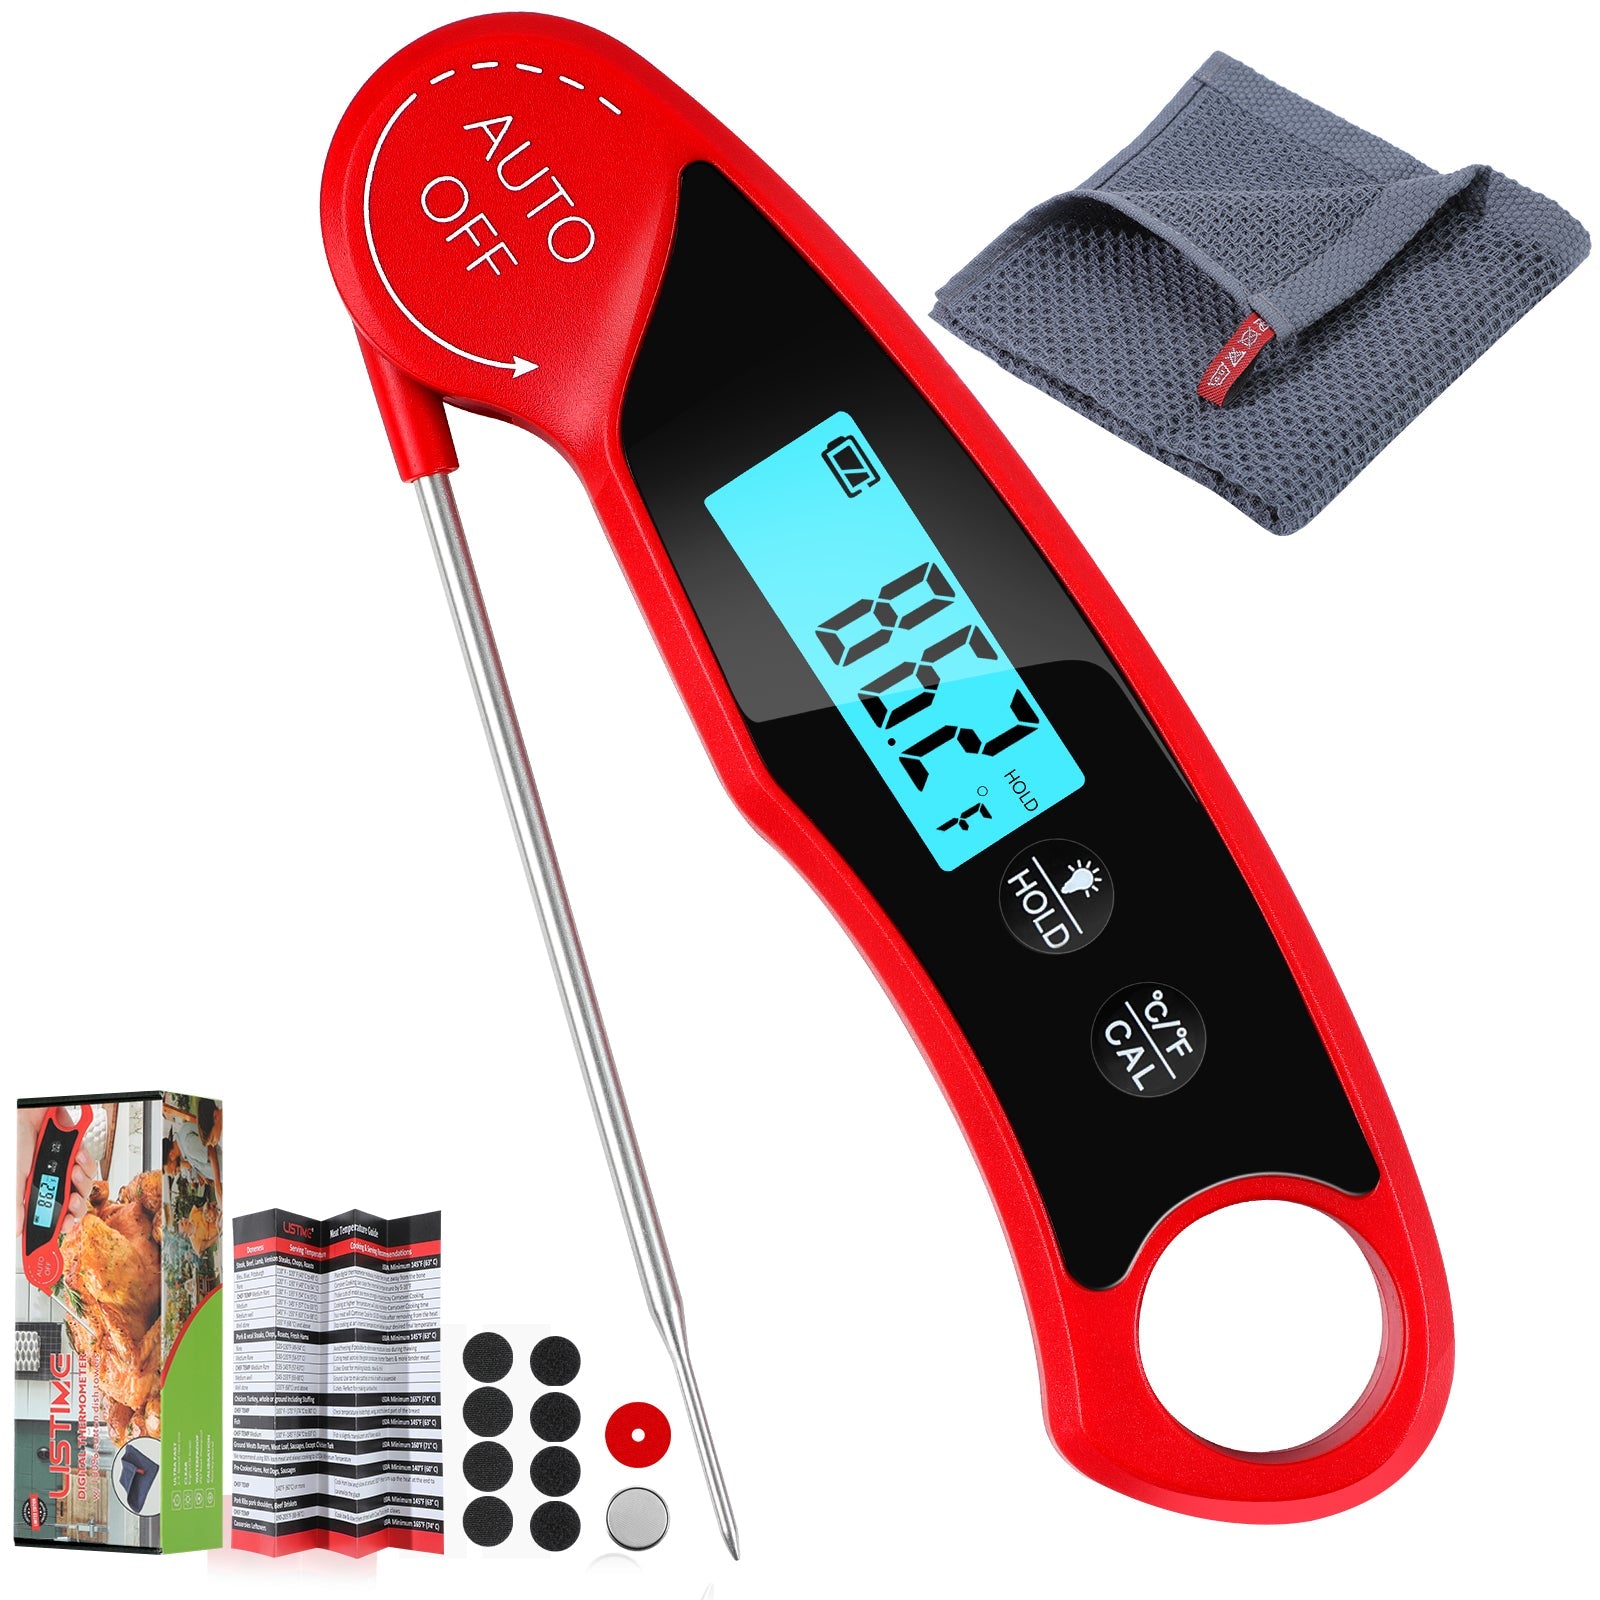 Listime® Digital Meat Thermometer Gift Set Edition: Ultra Fast, Waterproof with Blacklight and Calibration w/ Dish Towel